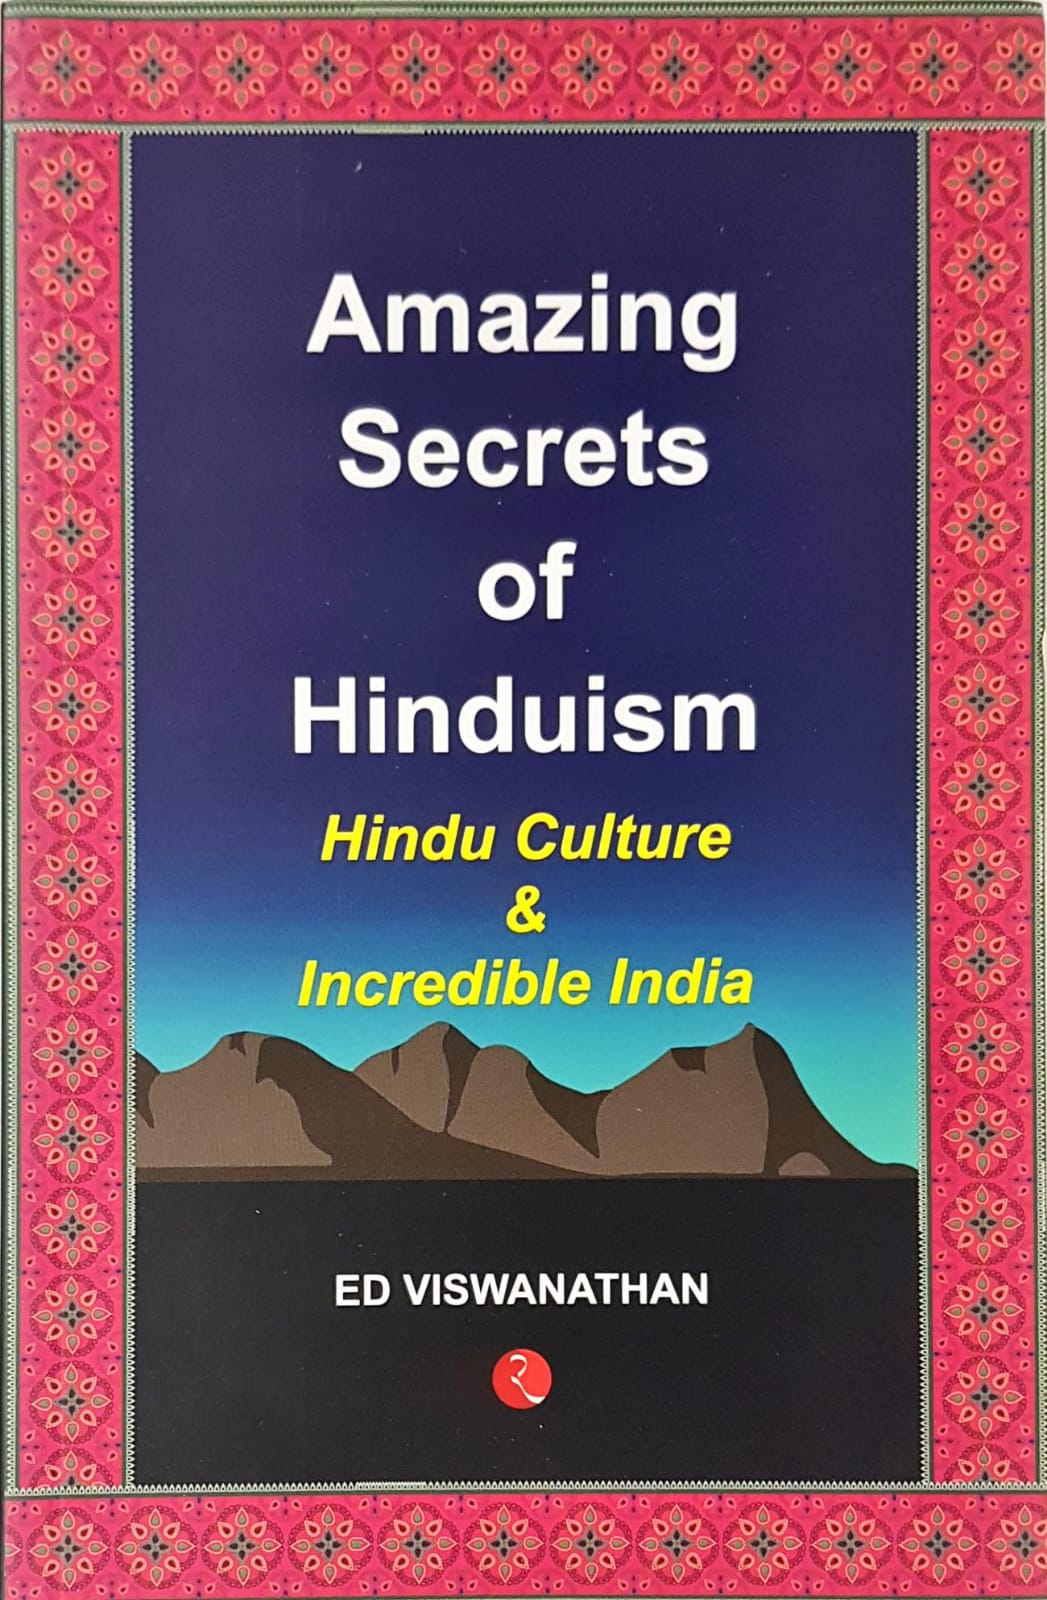 Amazing Secrets of Hinduism - Hindu Culture and Incredible India